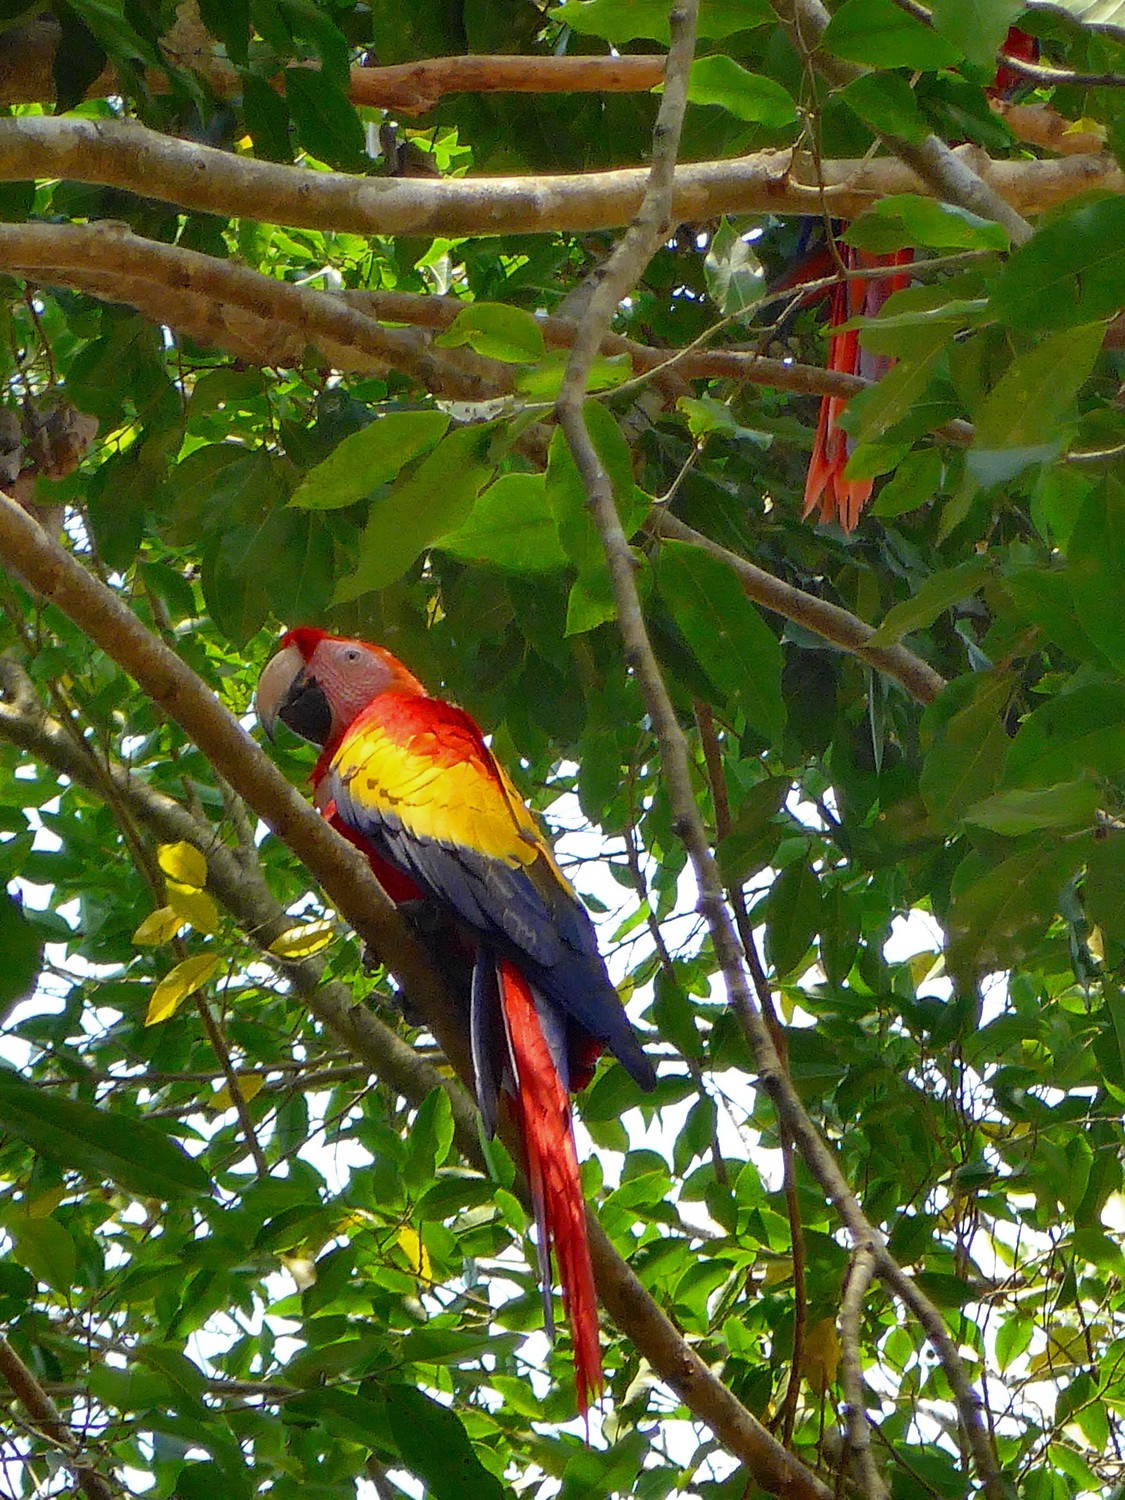 Another Scarlet Macaw with black-grey back